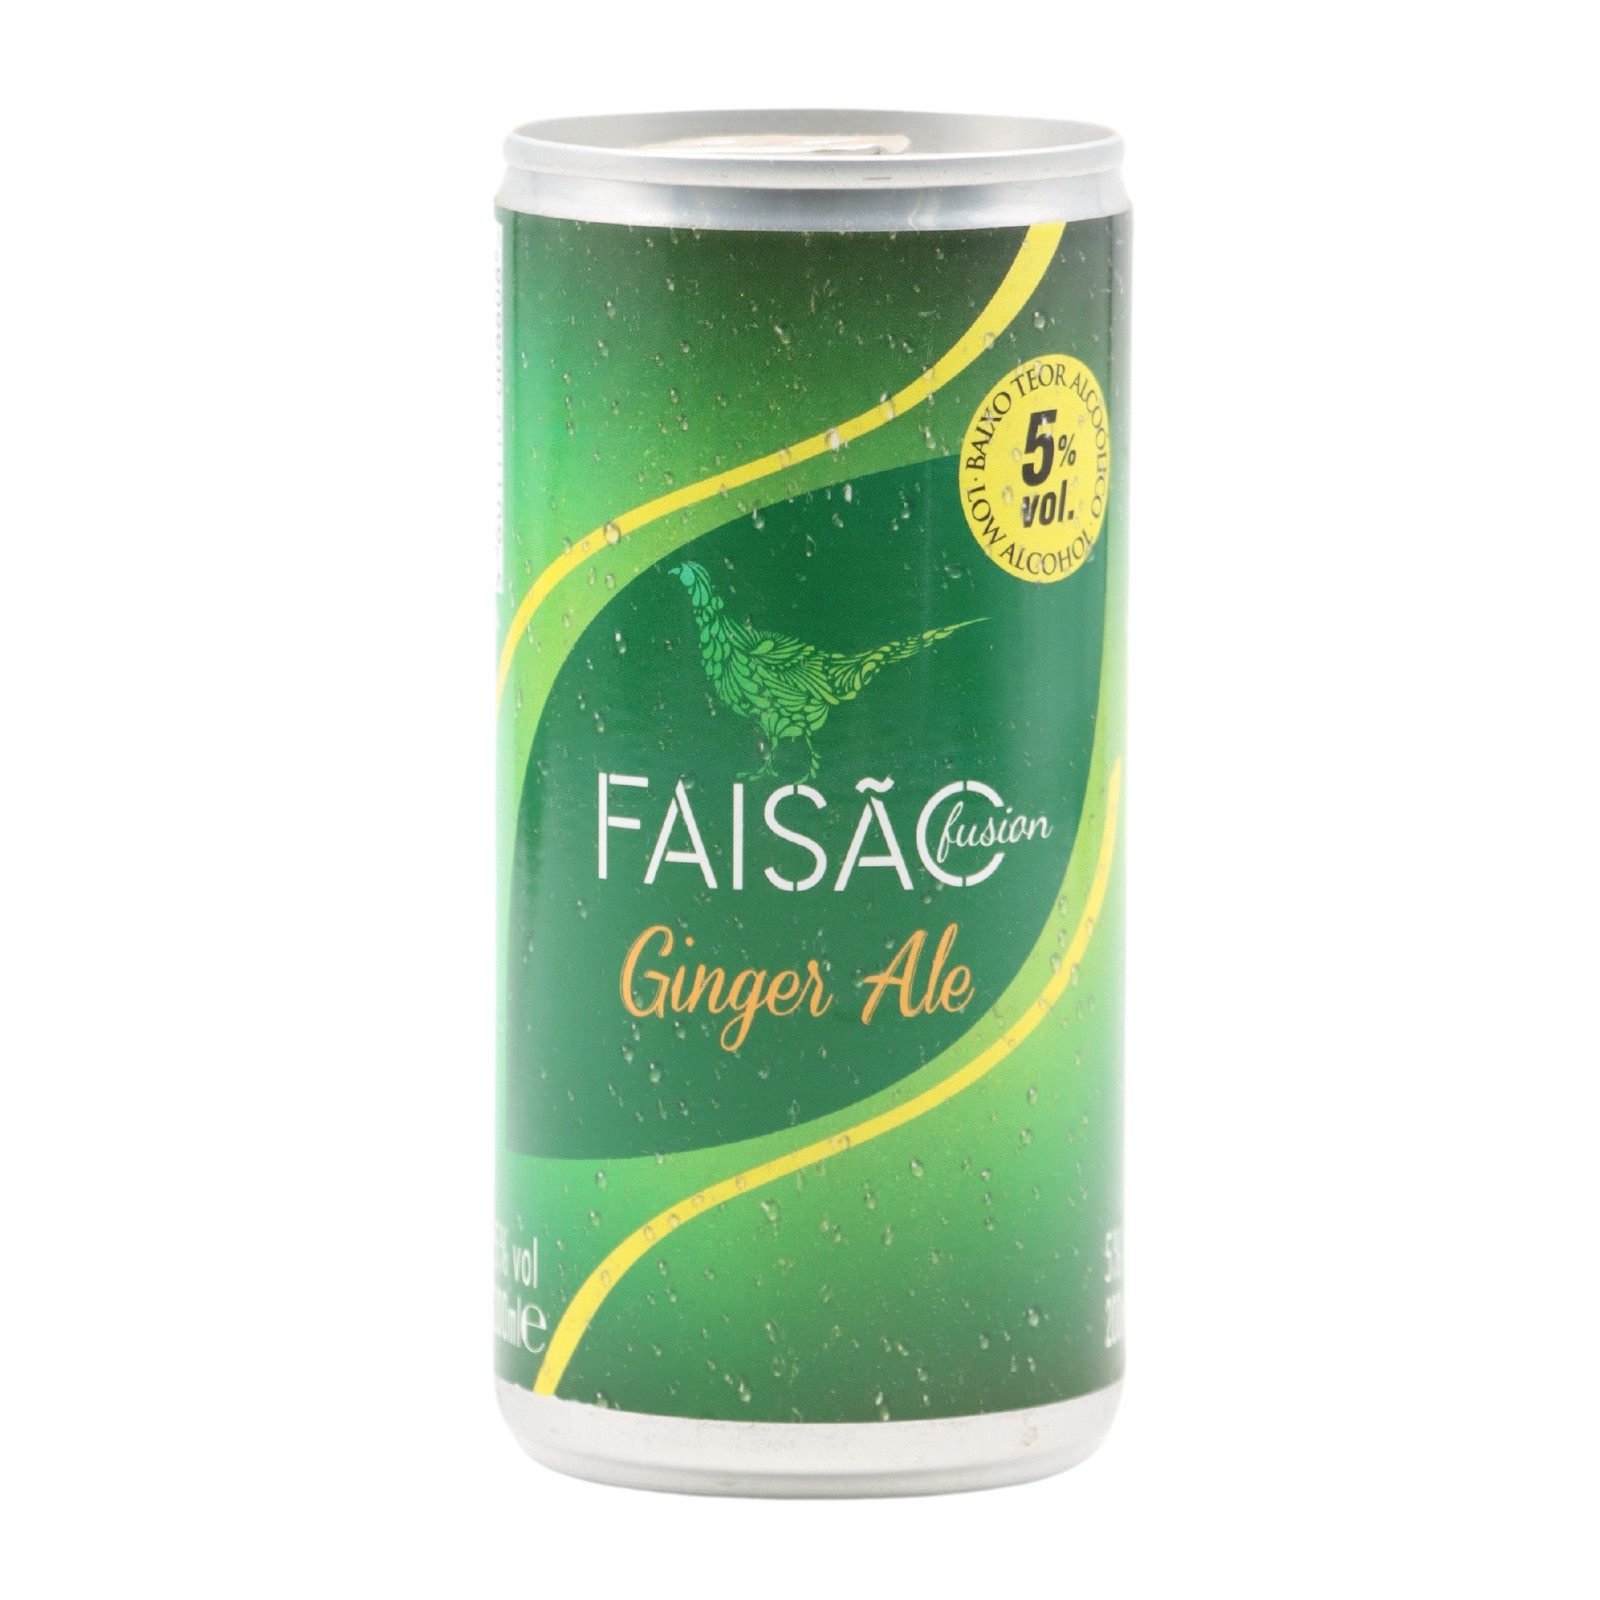 Faisão Fusion Ginger Ale in can